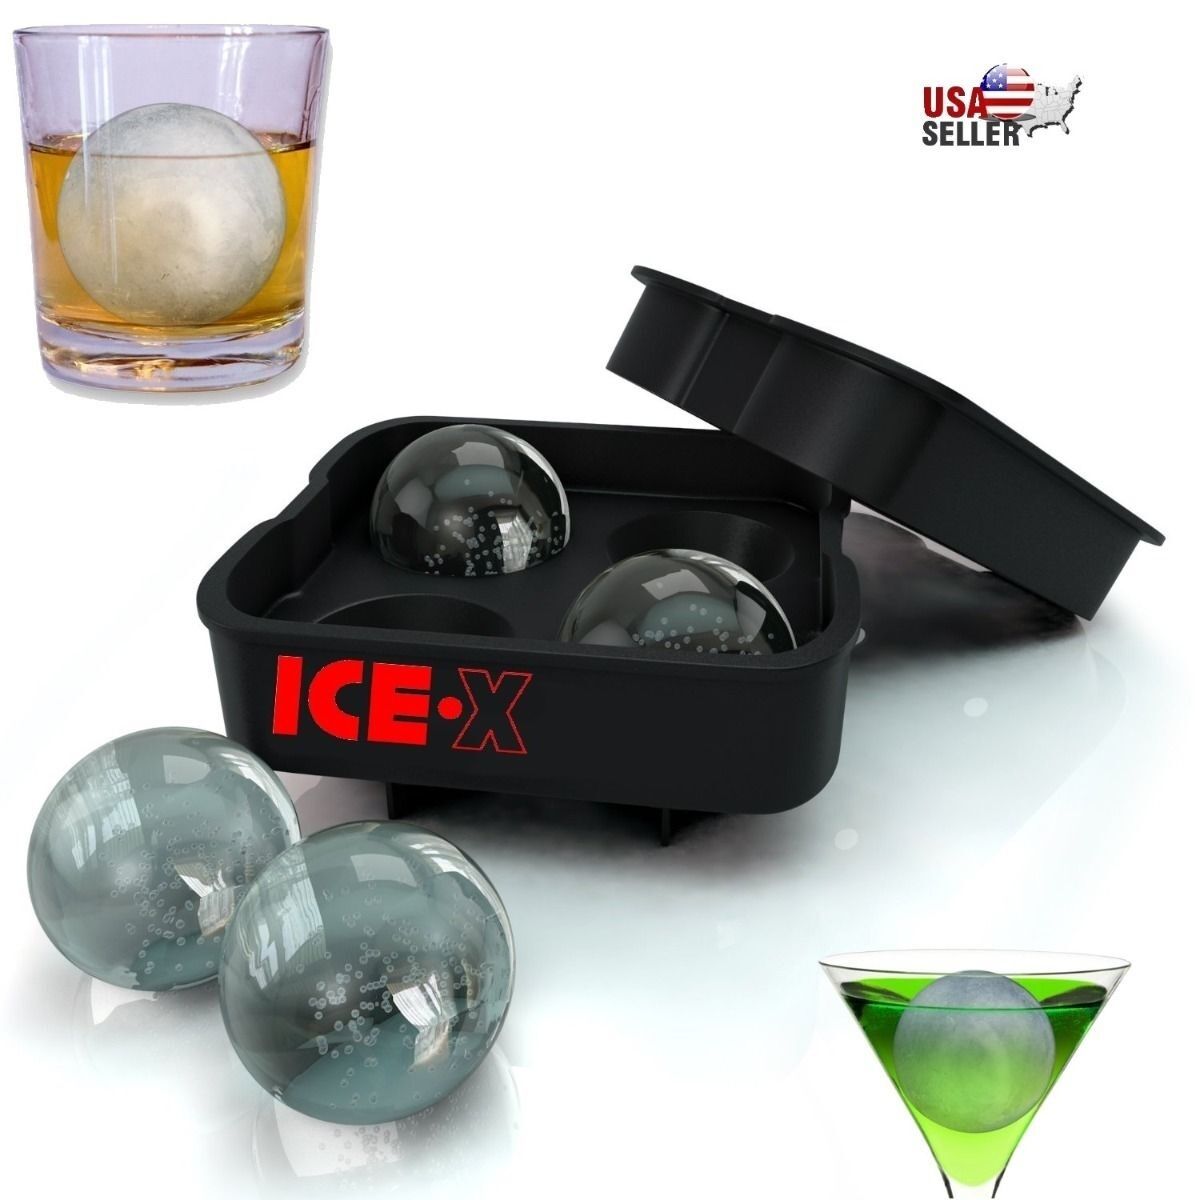 ICE Balls Maker Round Sphere Tray Mold Cube Whiskey Ball Cocktails Silicone ICE-X 4 Ice Ball Mold